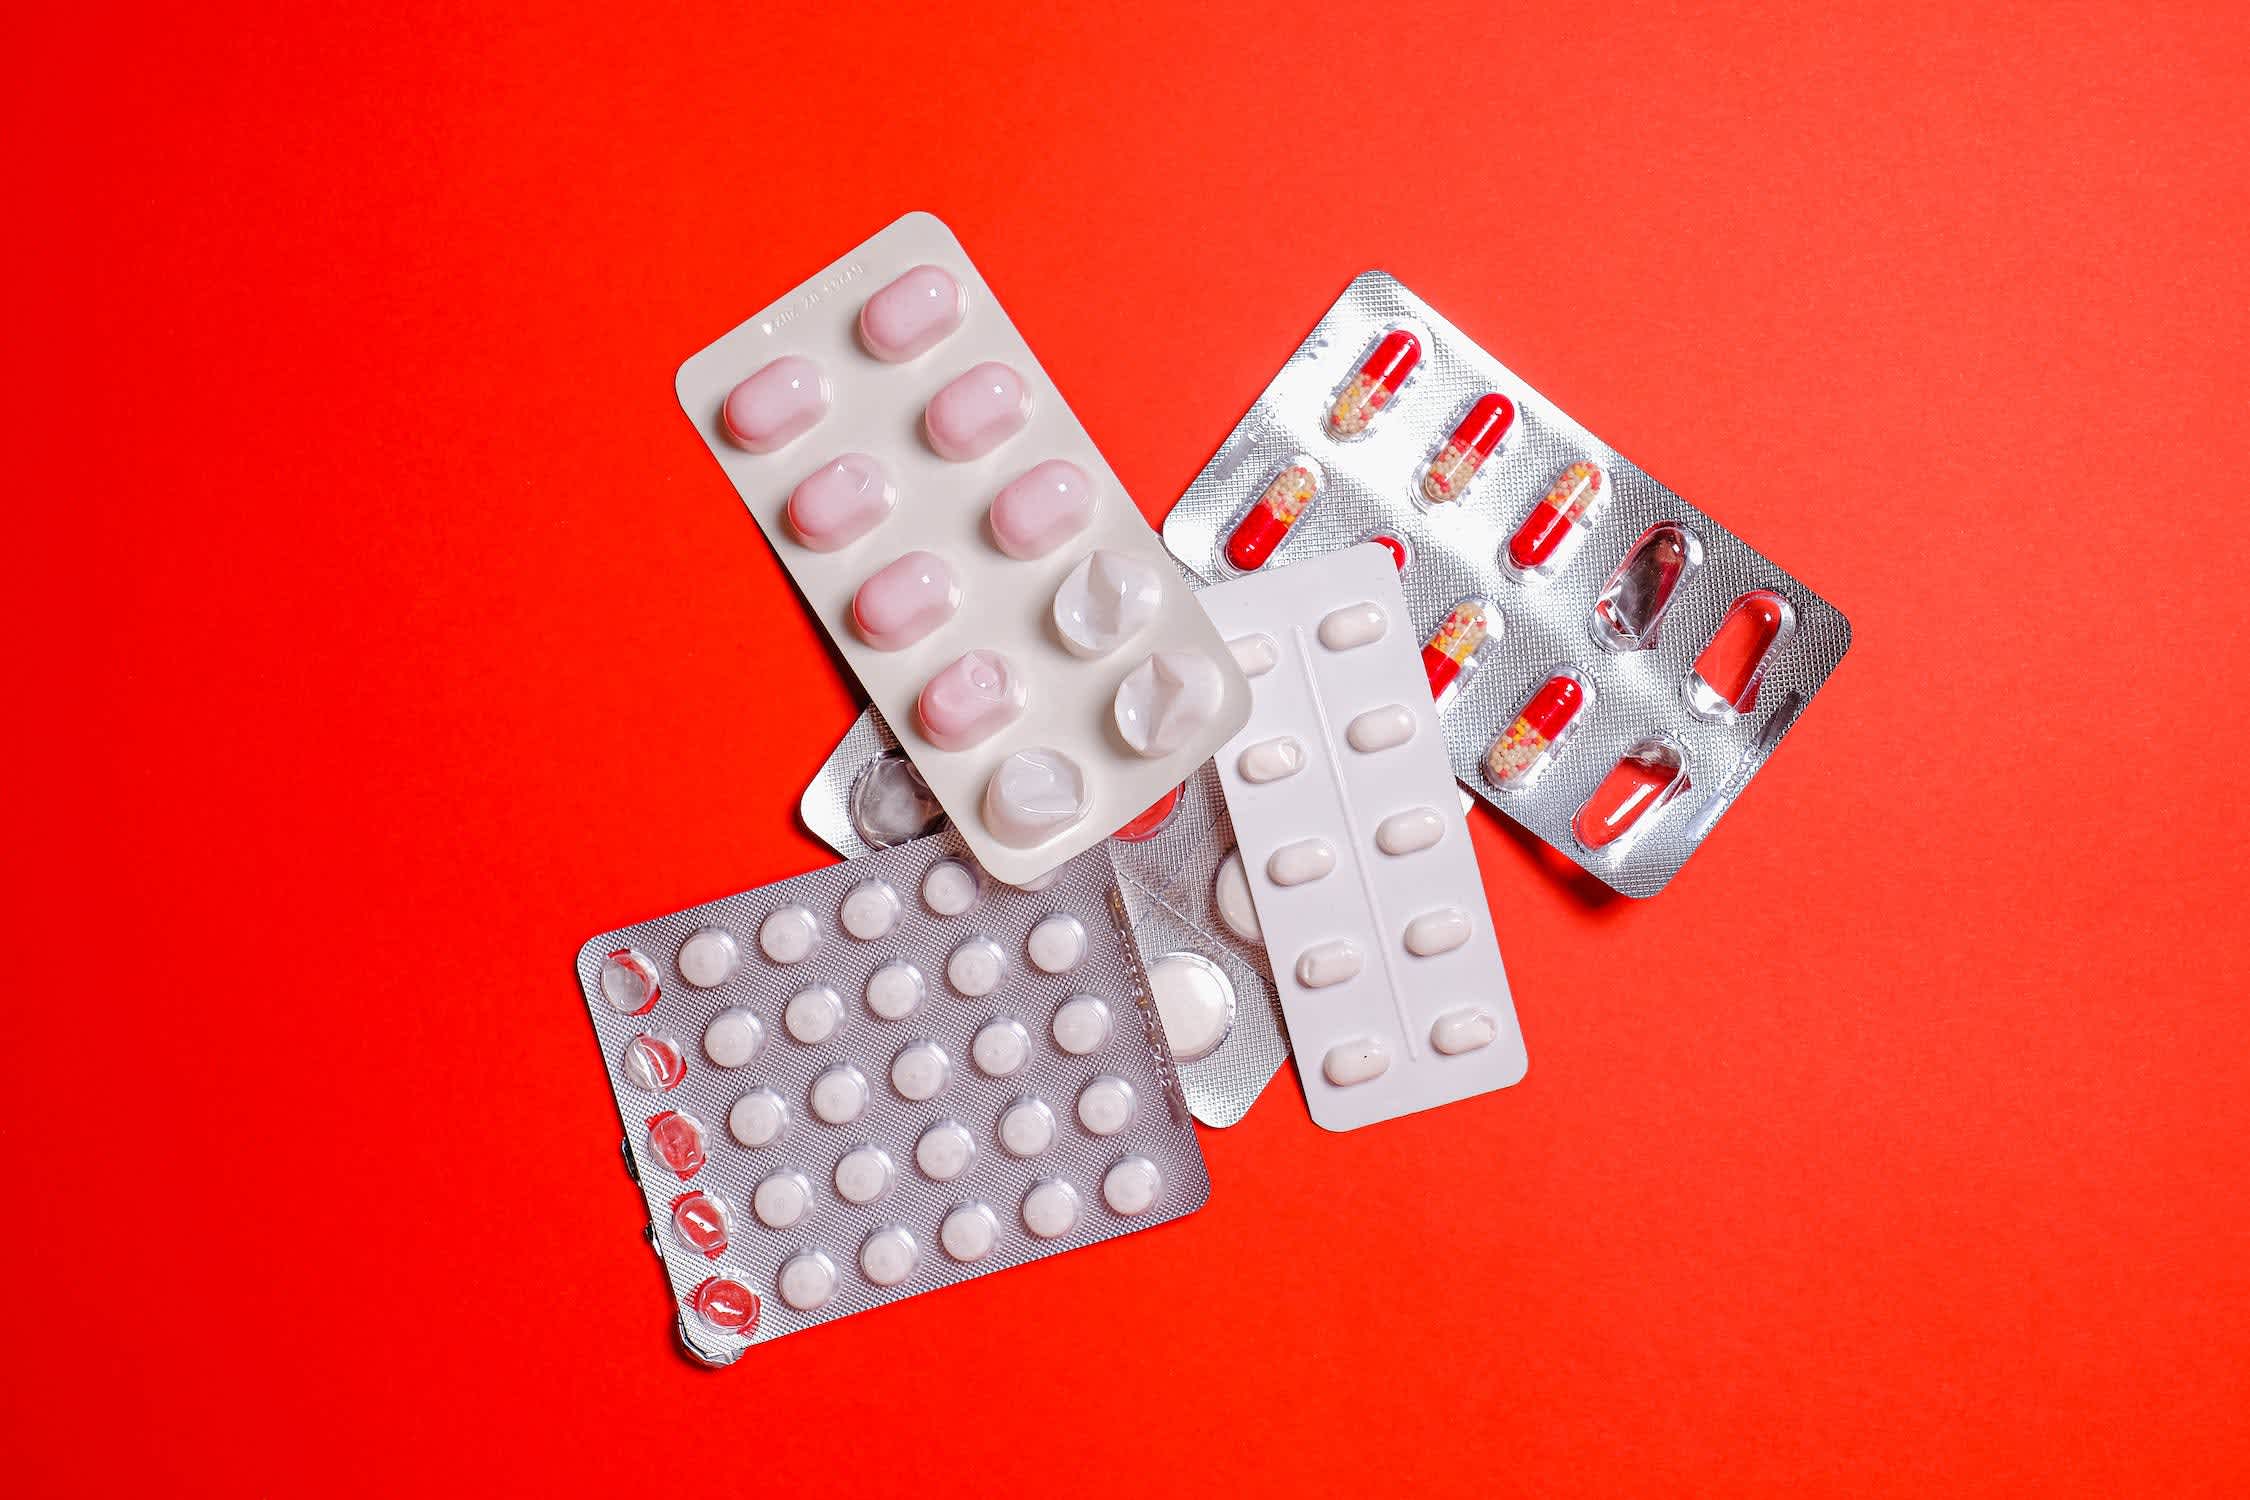 Metformin and other medications for weight loss against a red background